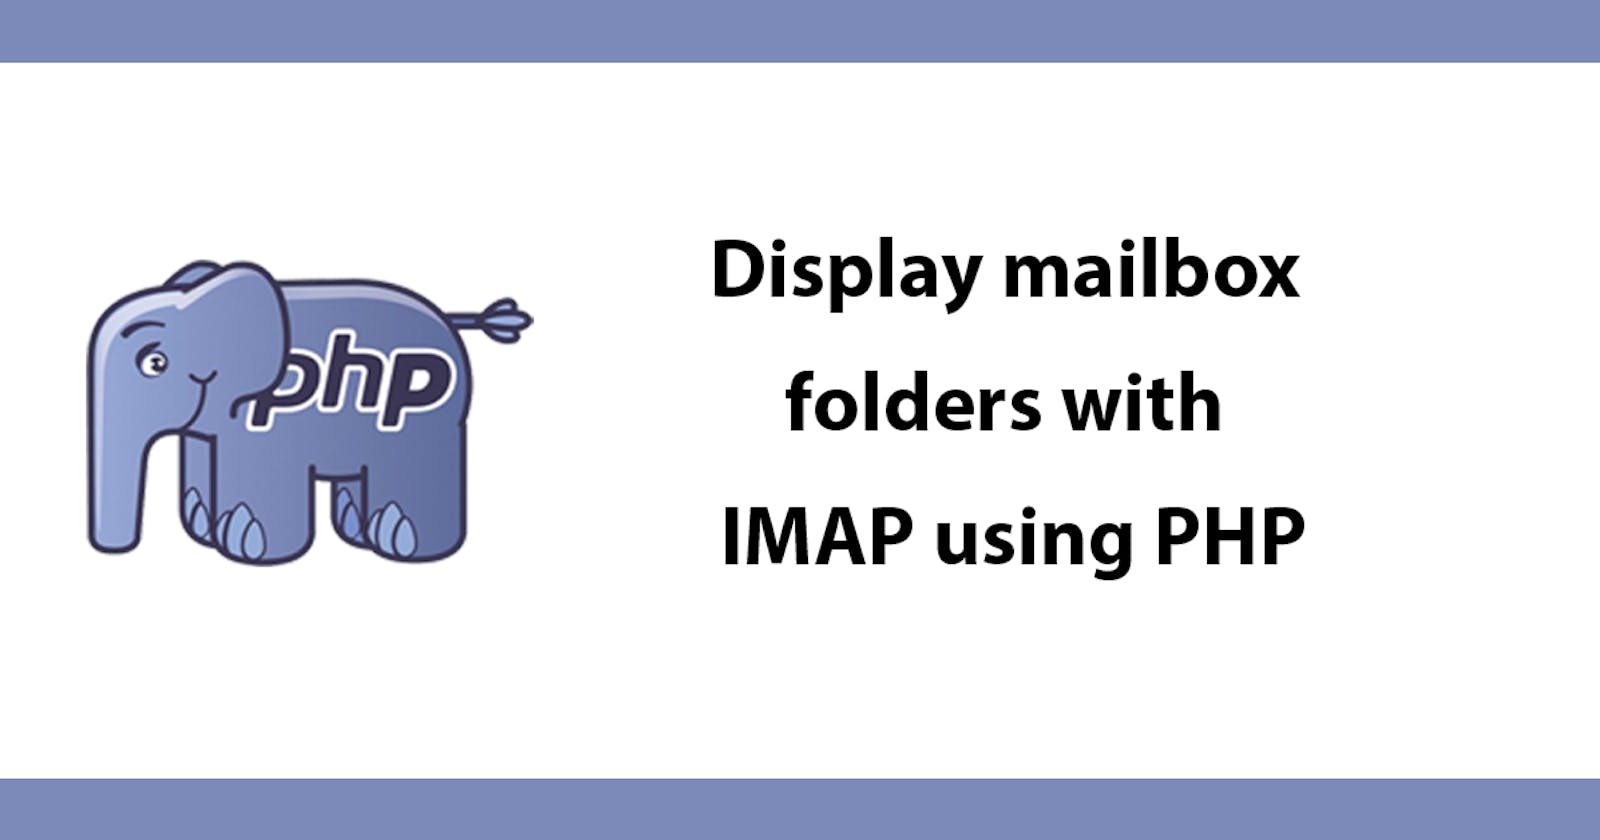 Display mailbox folders with IMAP using PHP